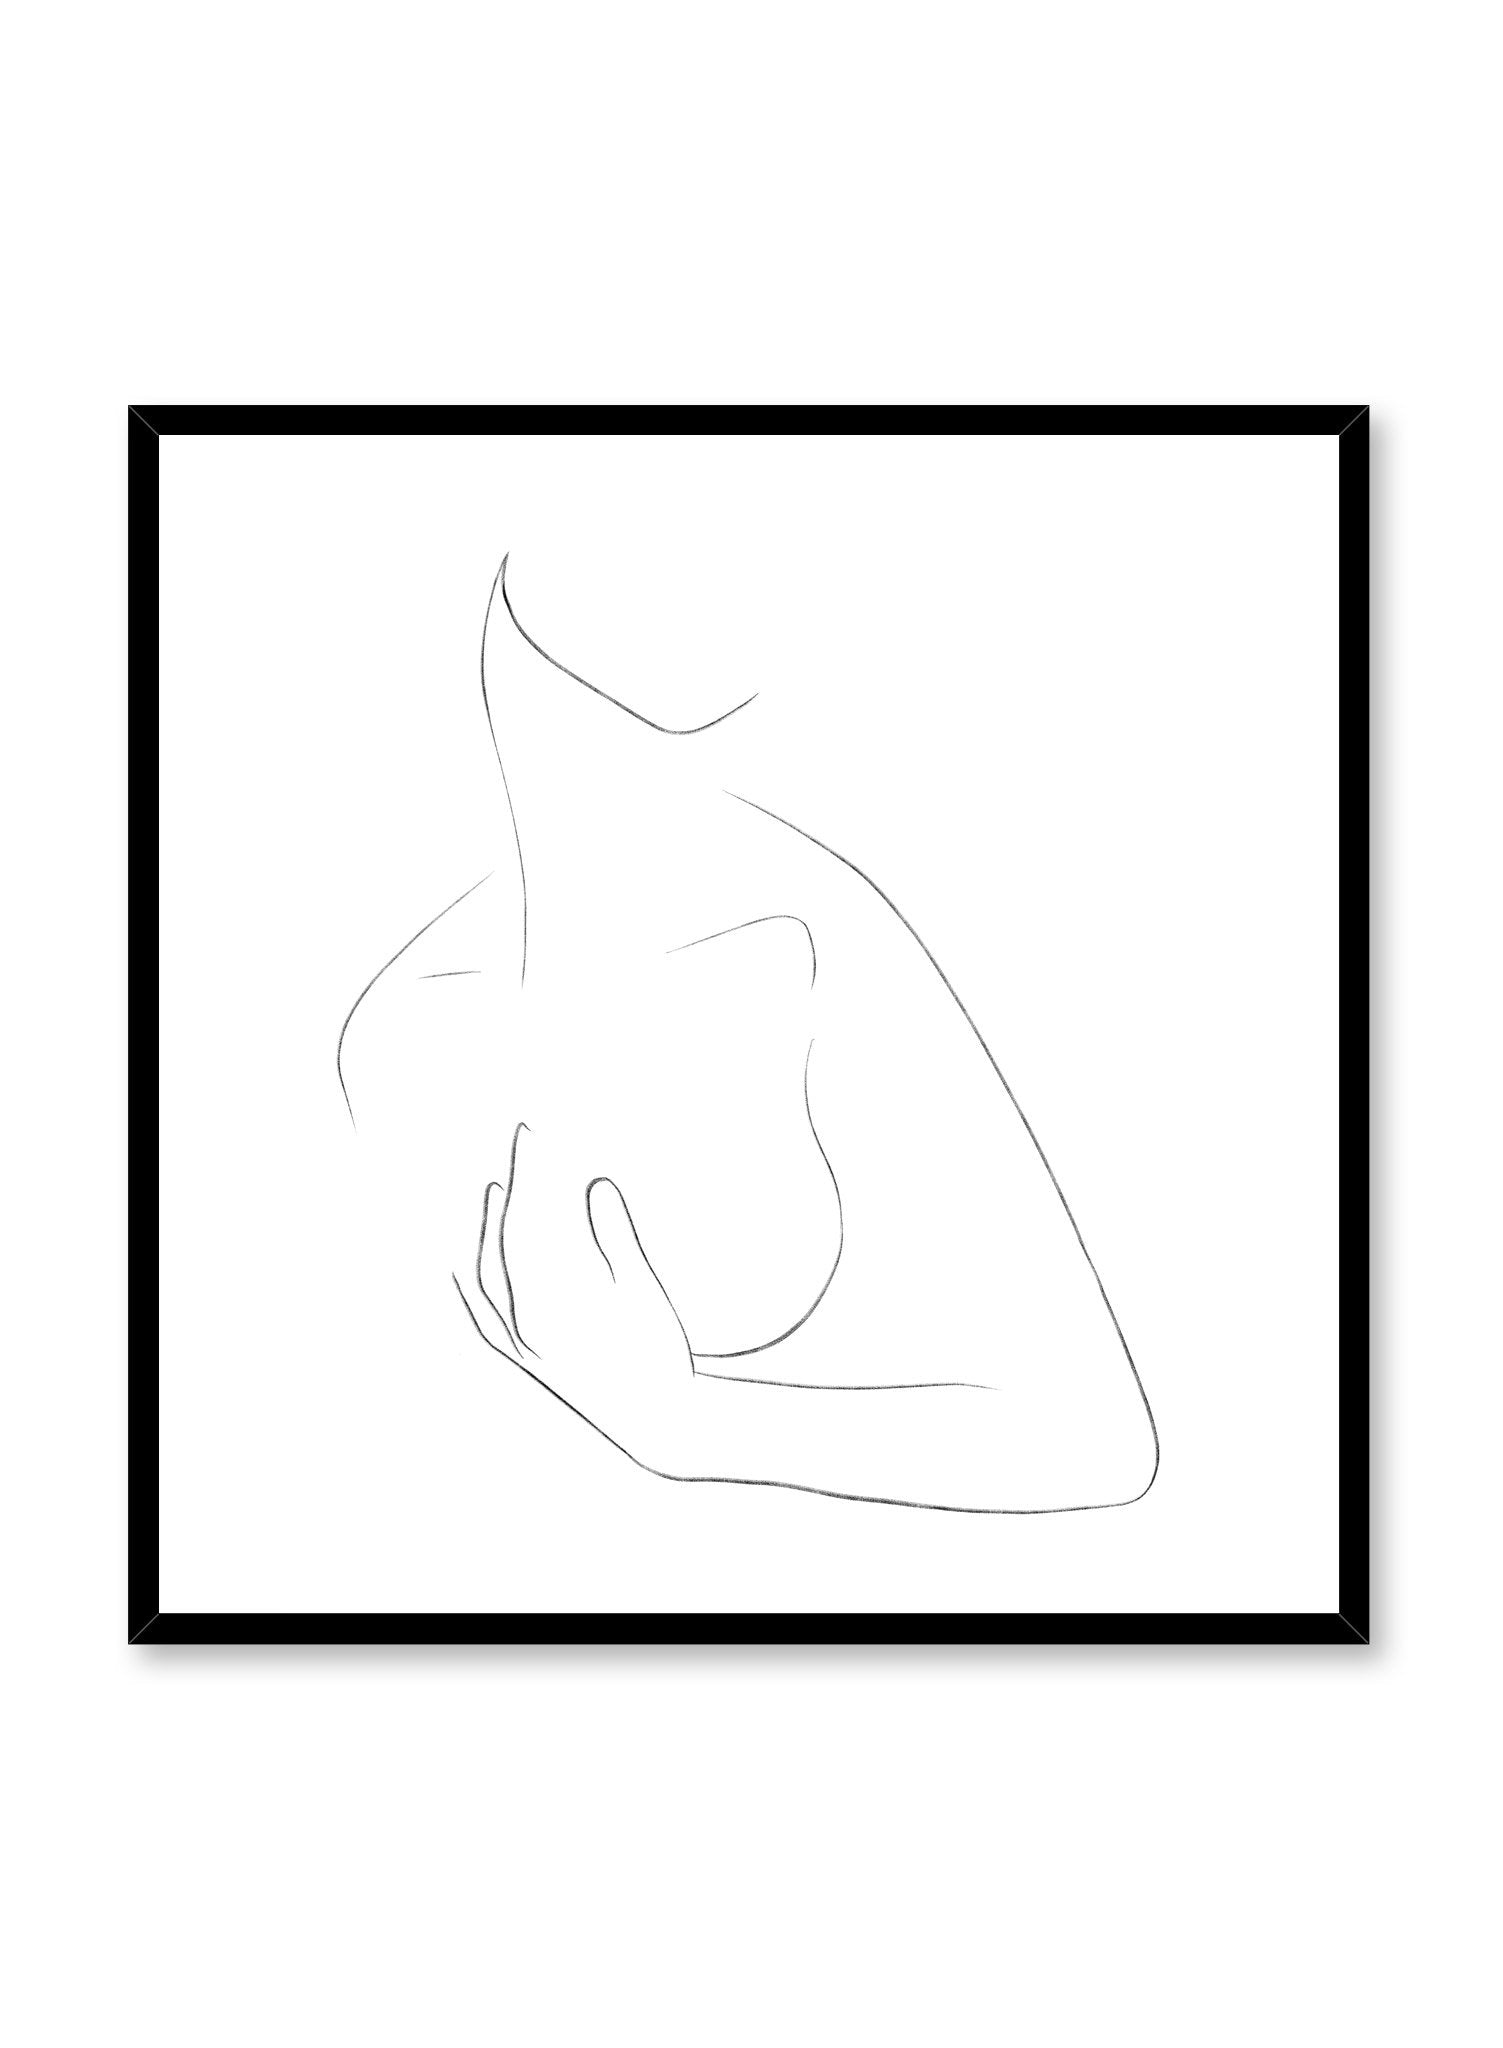 Modern minimalist delicate line art poster by Opposite Wall - Touch in square format